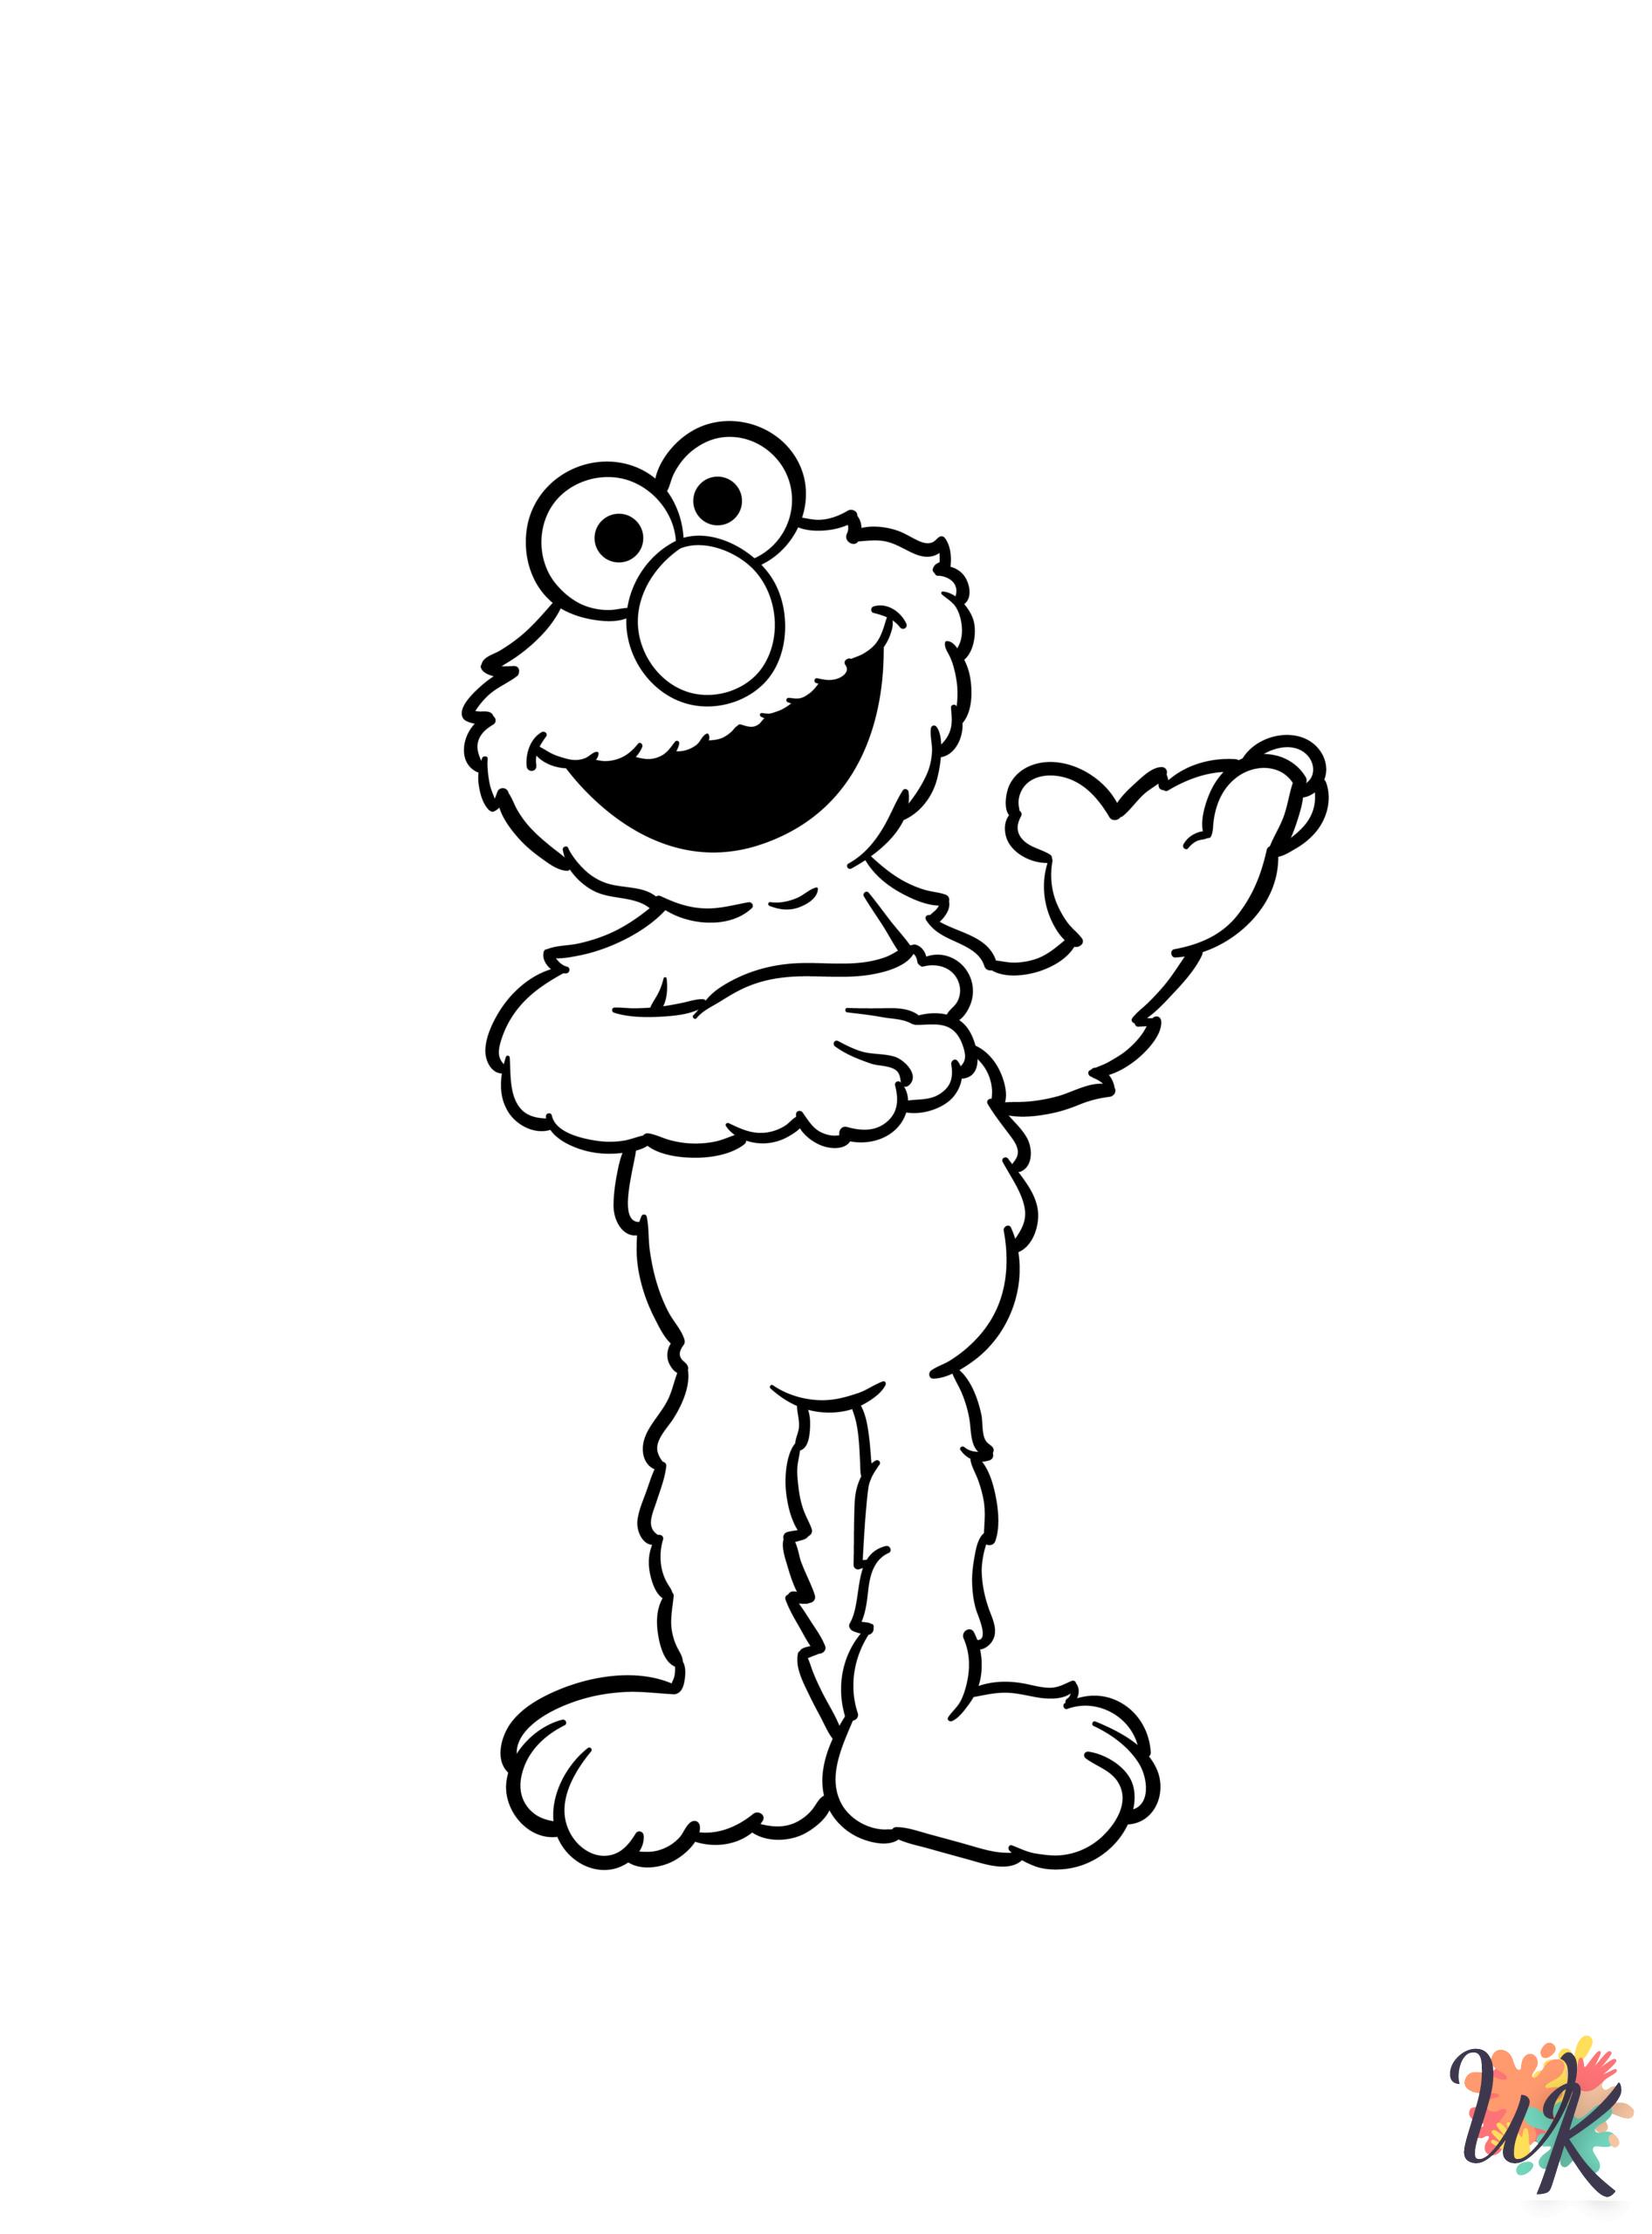 Elmo free coloring pages 2